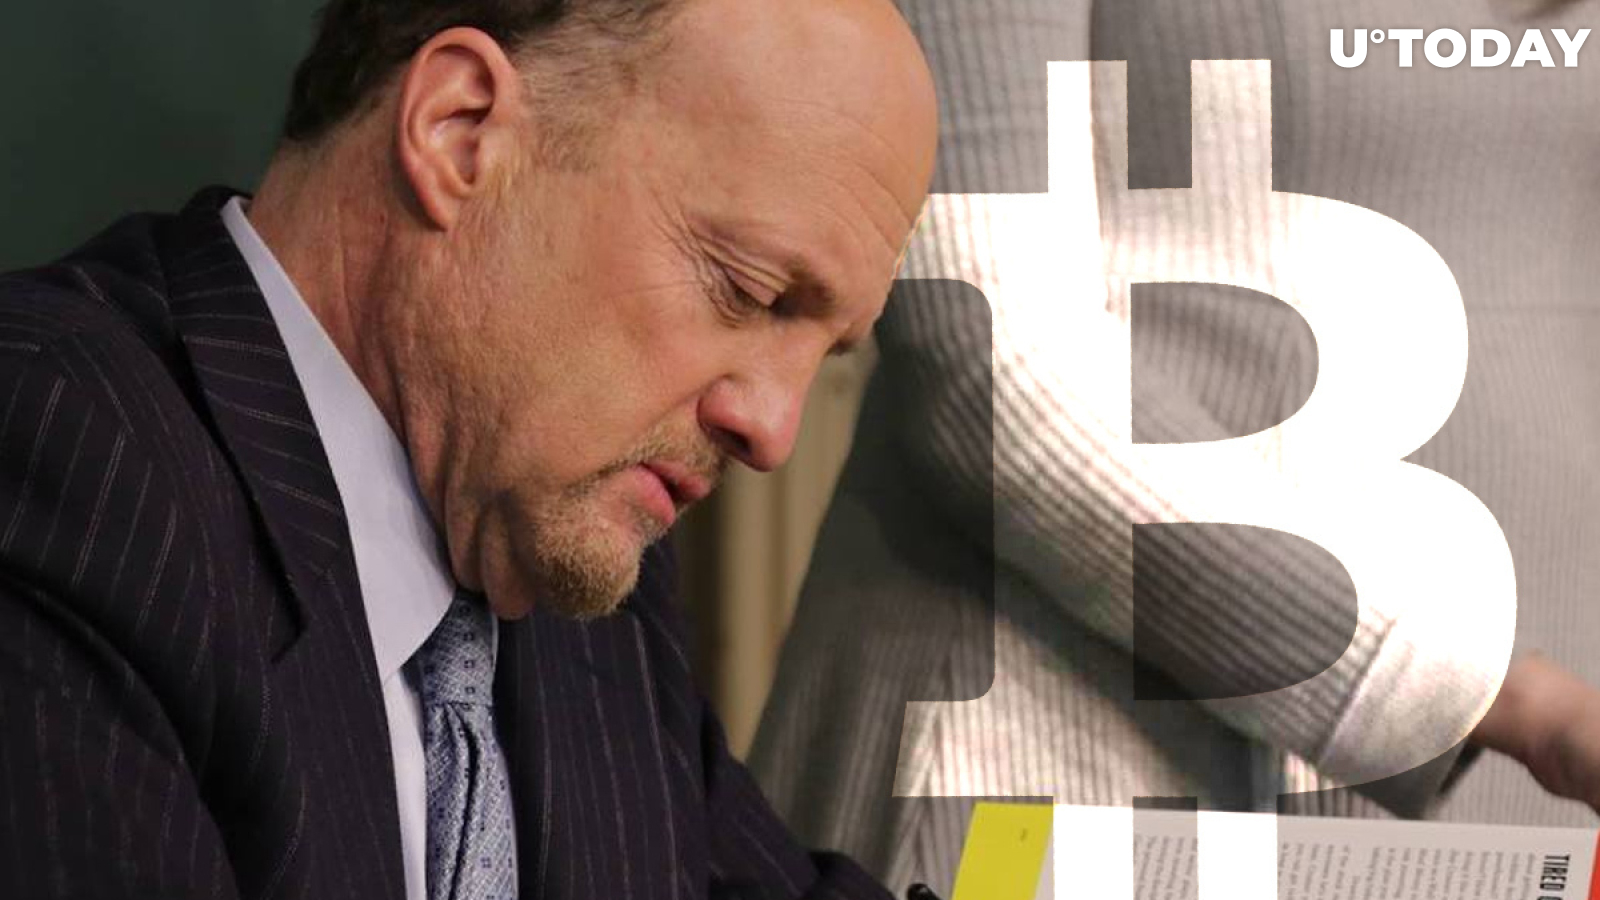 CNBC's Jim Cramer Says It's "Irresponsible" for Companies Not to Add Bitcoin